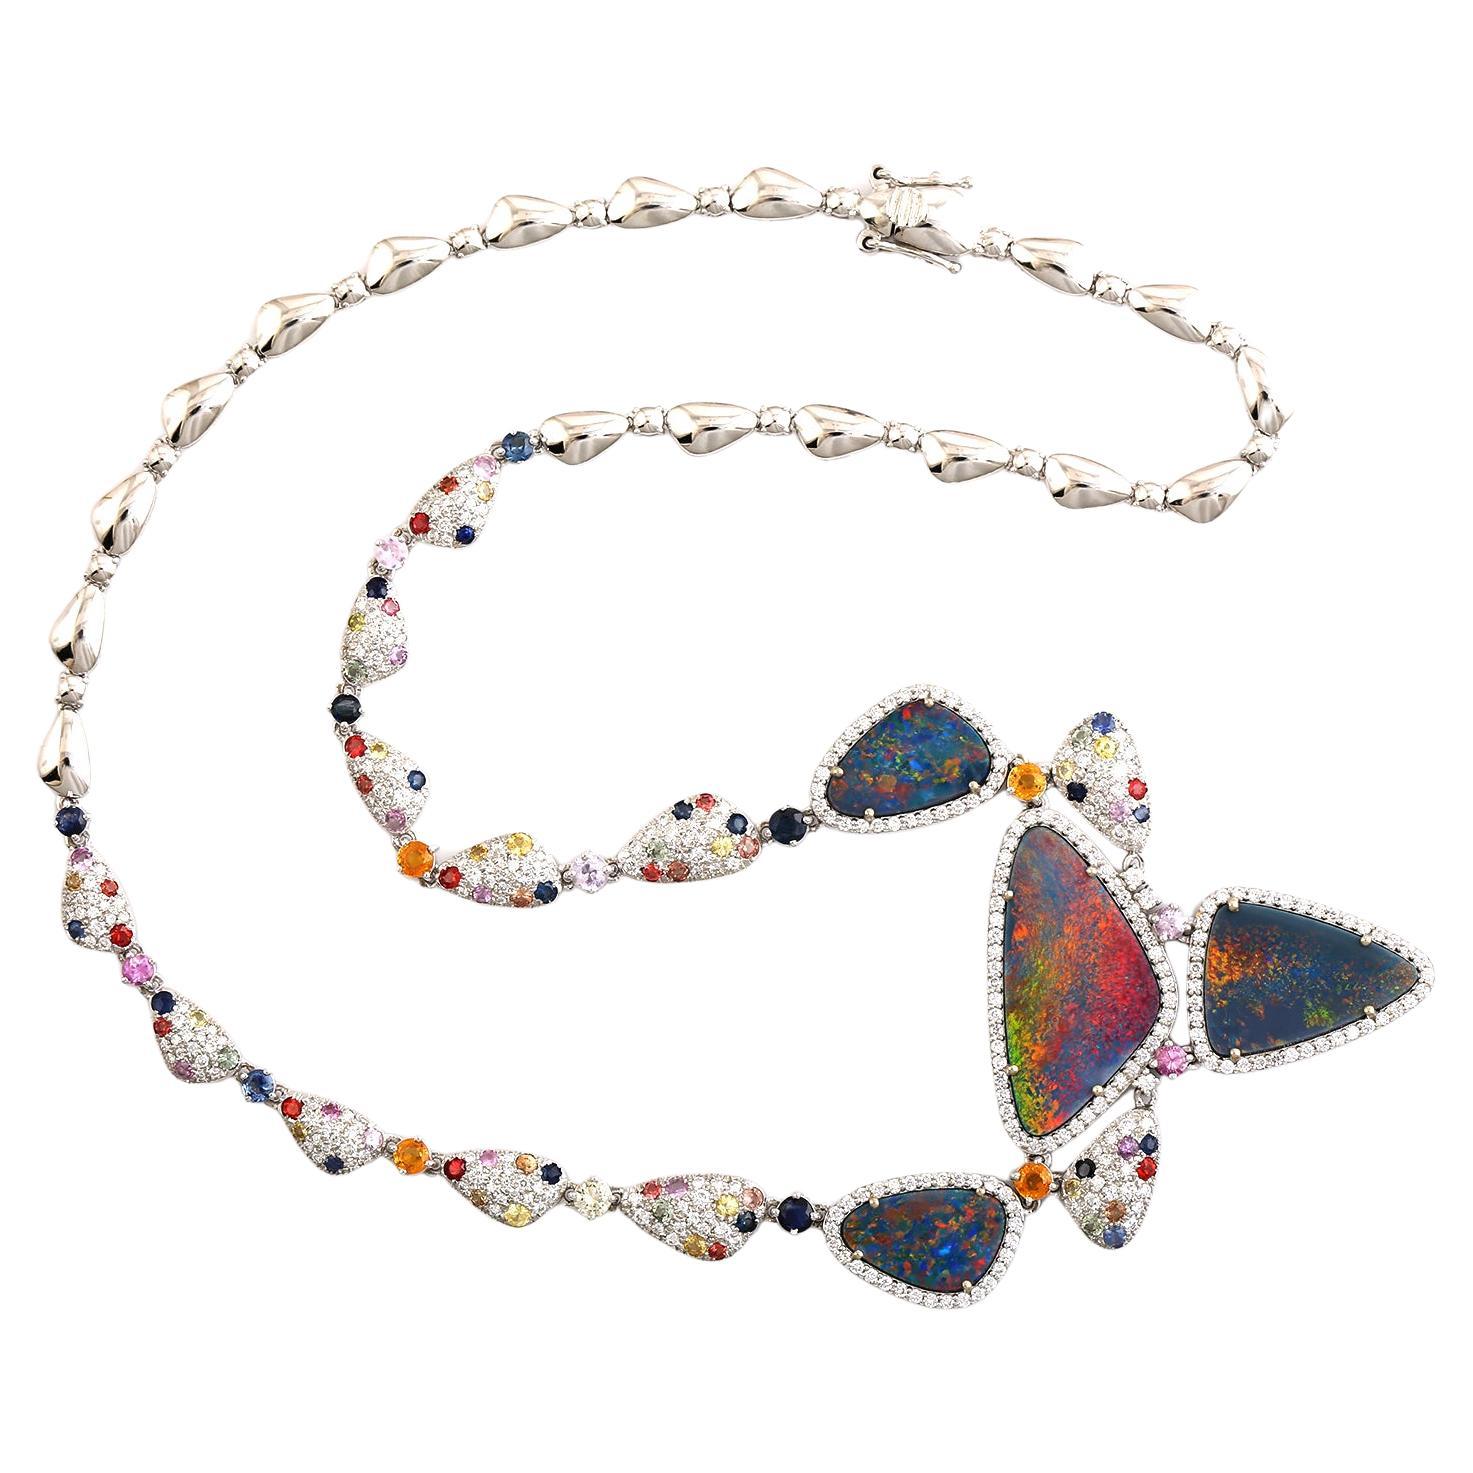 10.90 Ethiopian Opal Necklace With Multi Sapphire & Diamonds In 18k White Gold